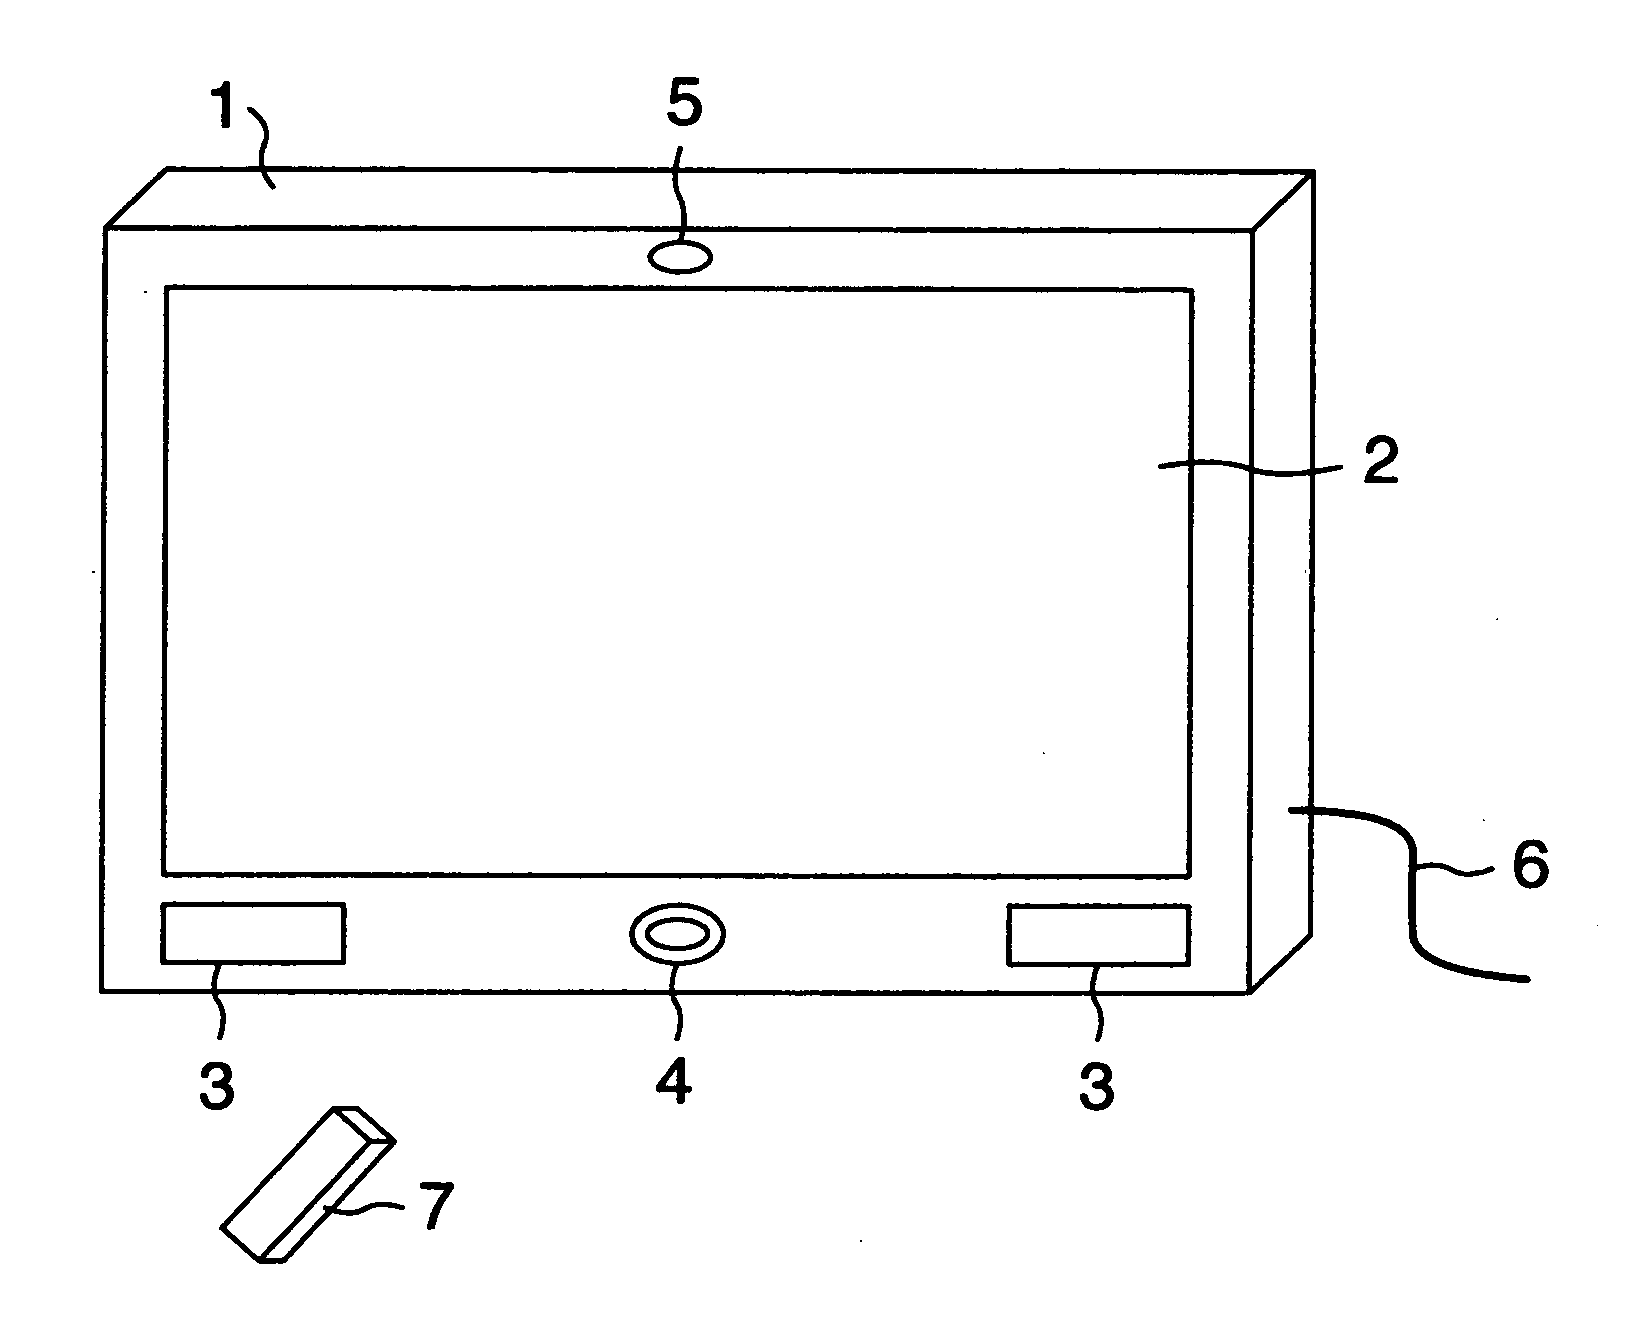 Television receiver with a TV phone function